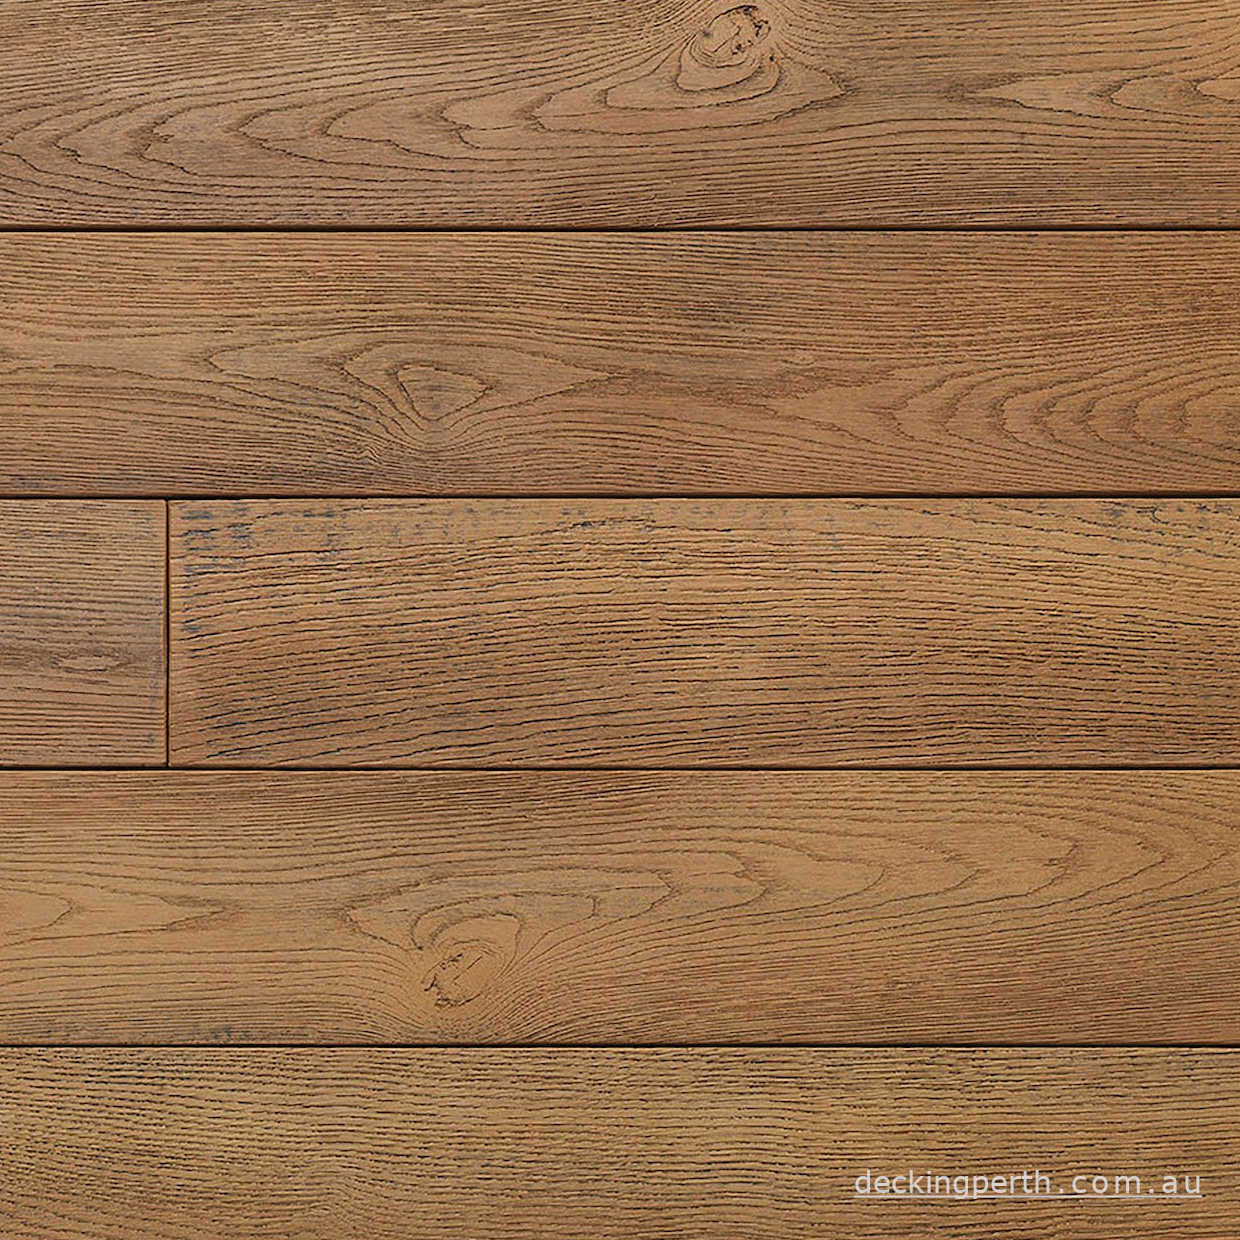 MILLBOARD_50_x_32mm_Flexible_Square_Edging_Coppered_Oak_2.4m_Decking_Perth